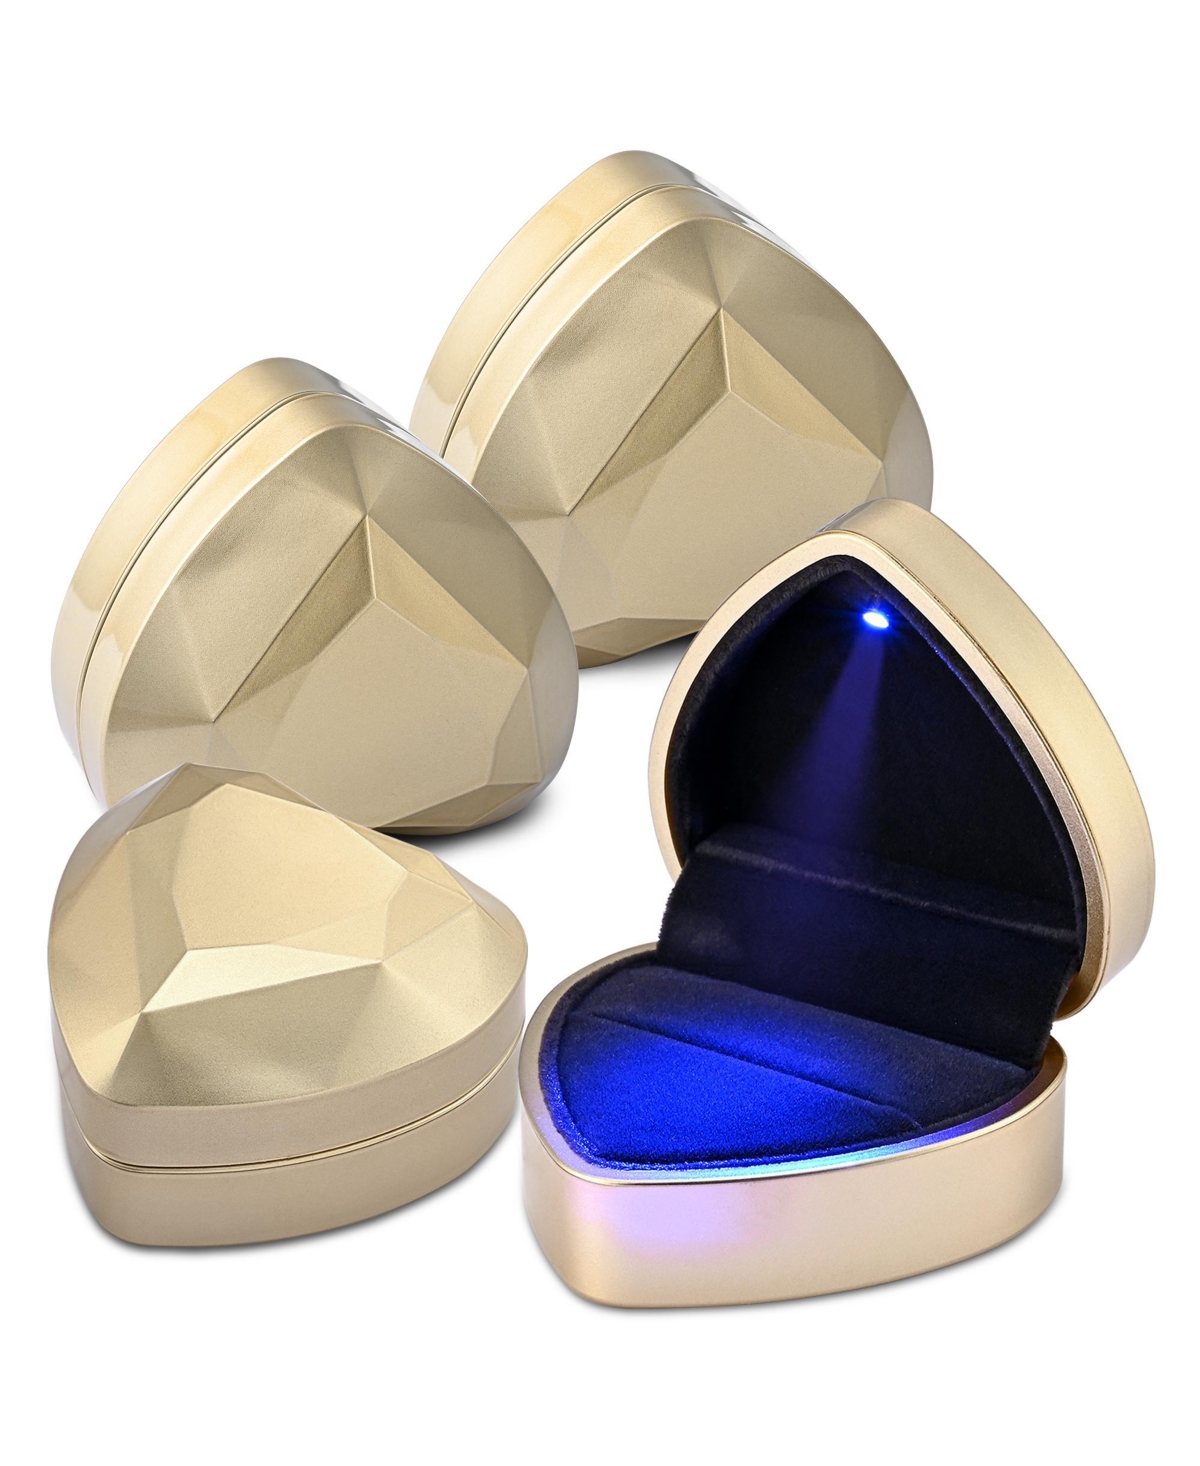 Heart Shape Led Ring Box Jewelry Wedding Engagement Proposal Lighted Case 4 Pack - Gold